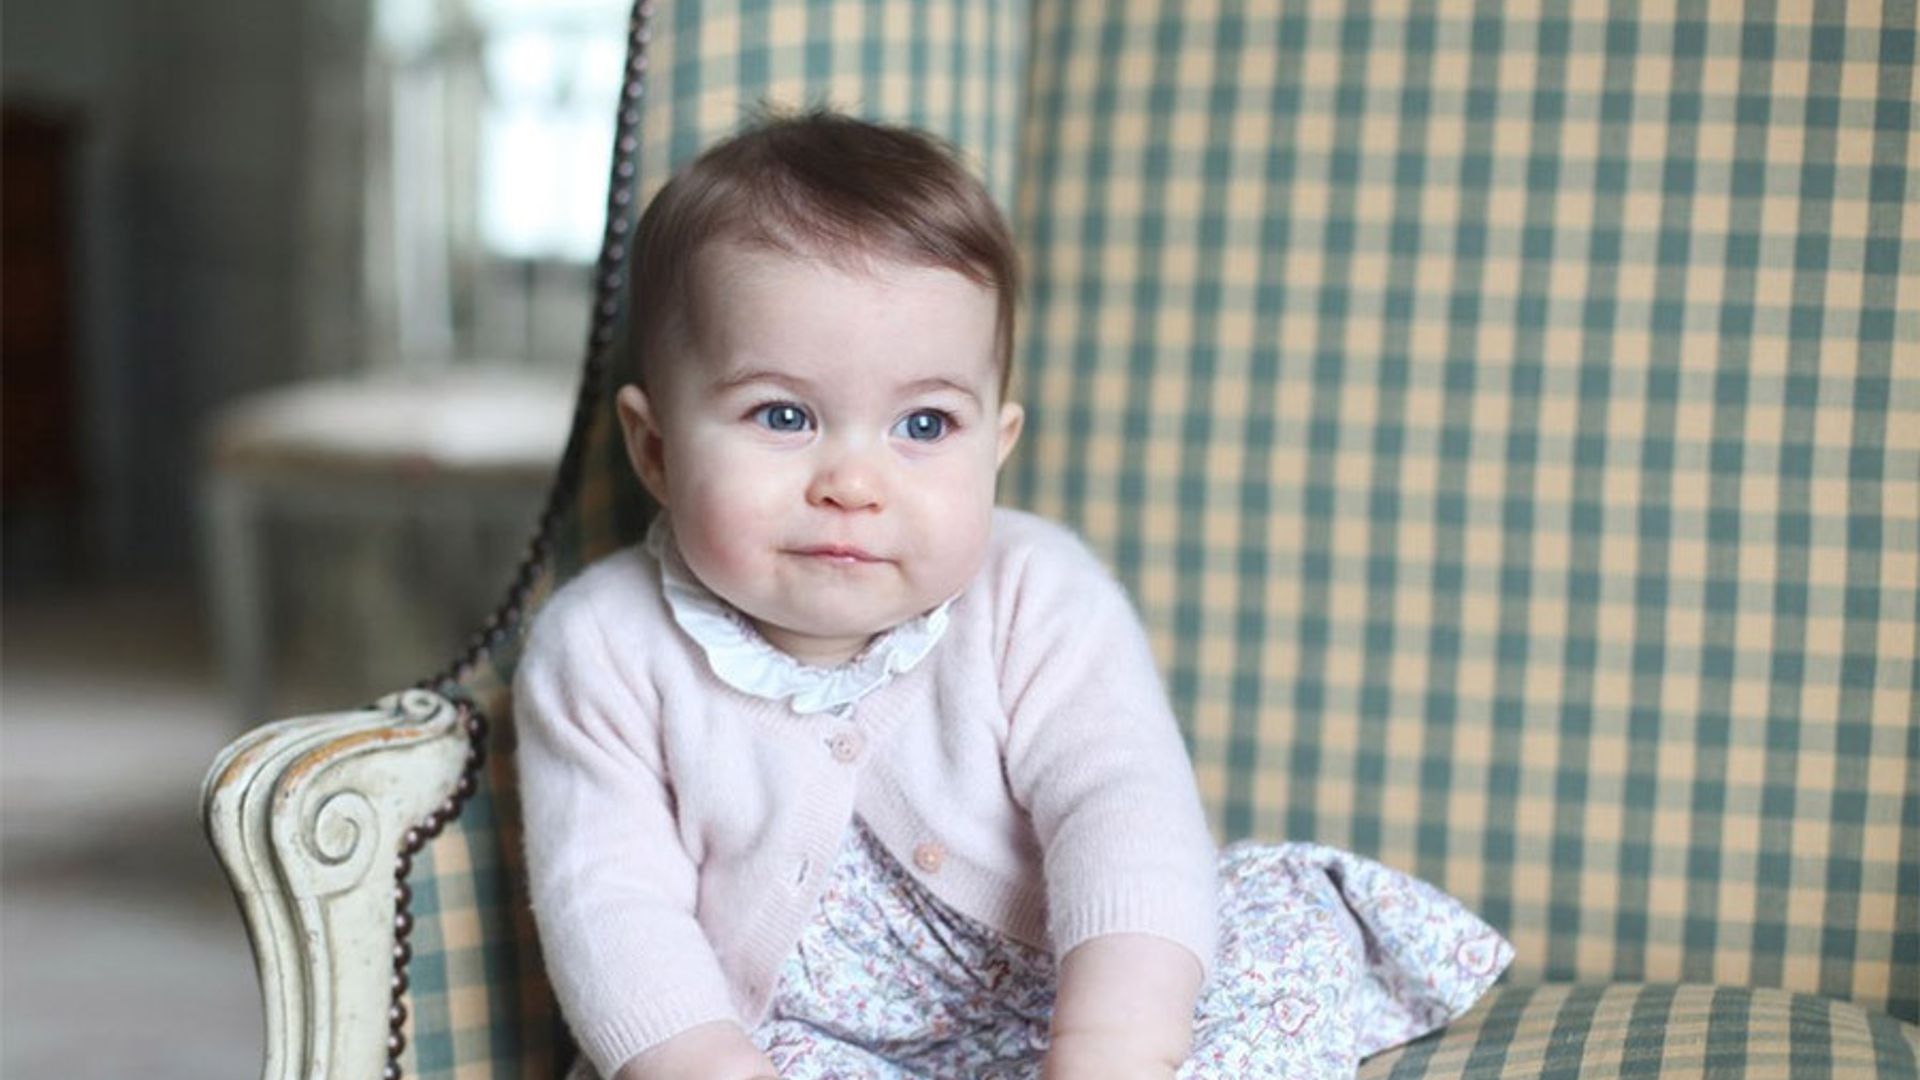 Who designed Prince George and Princess Charlotte's royal birthday portrait outfits?